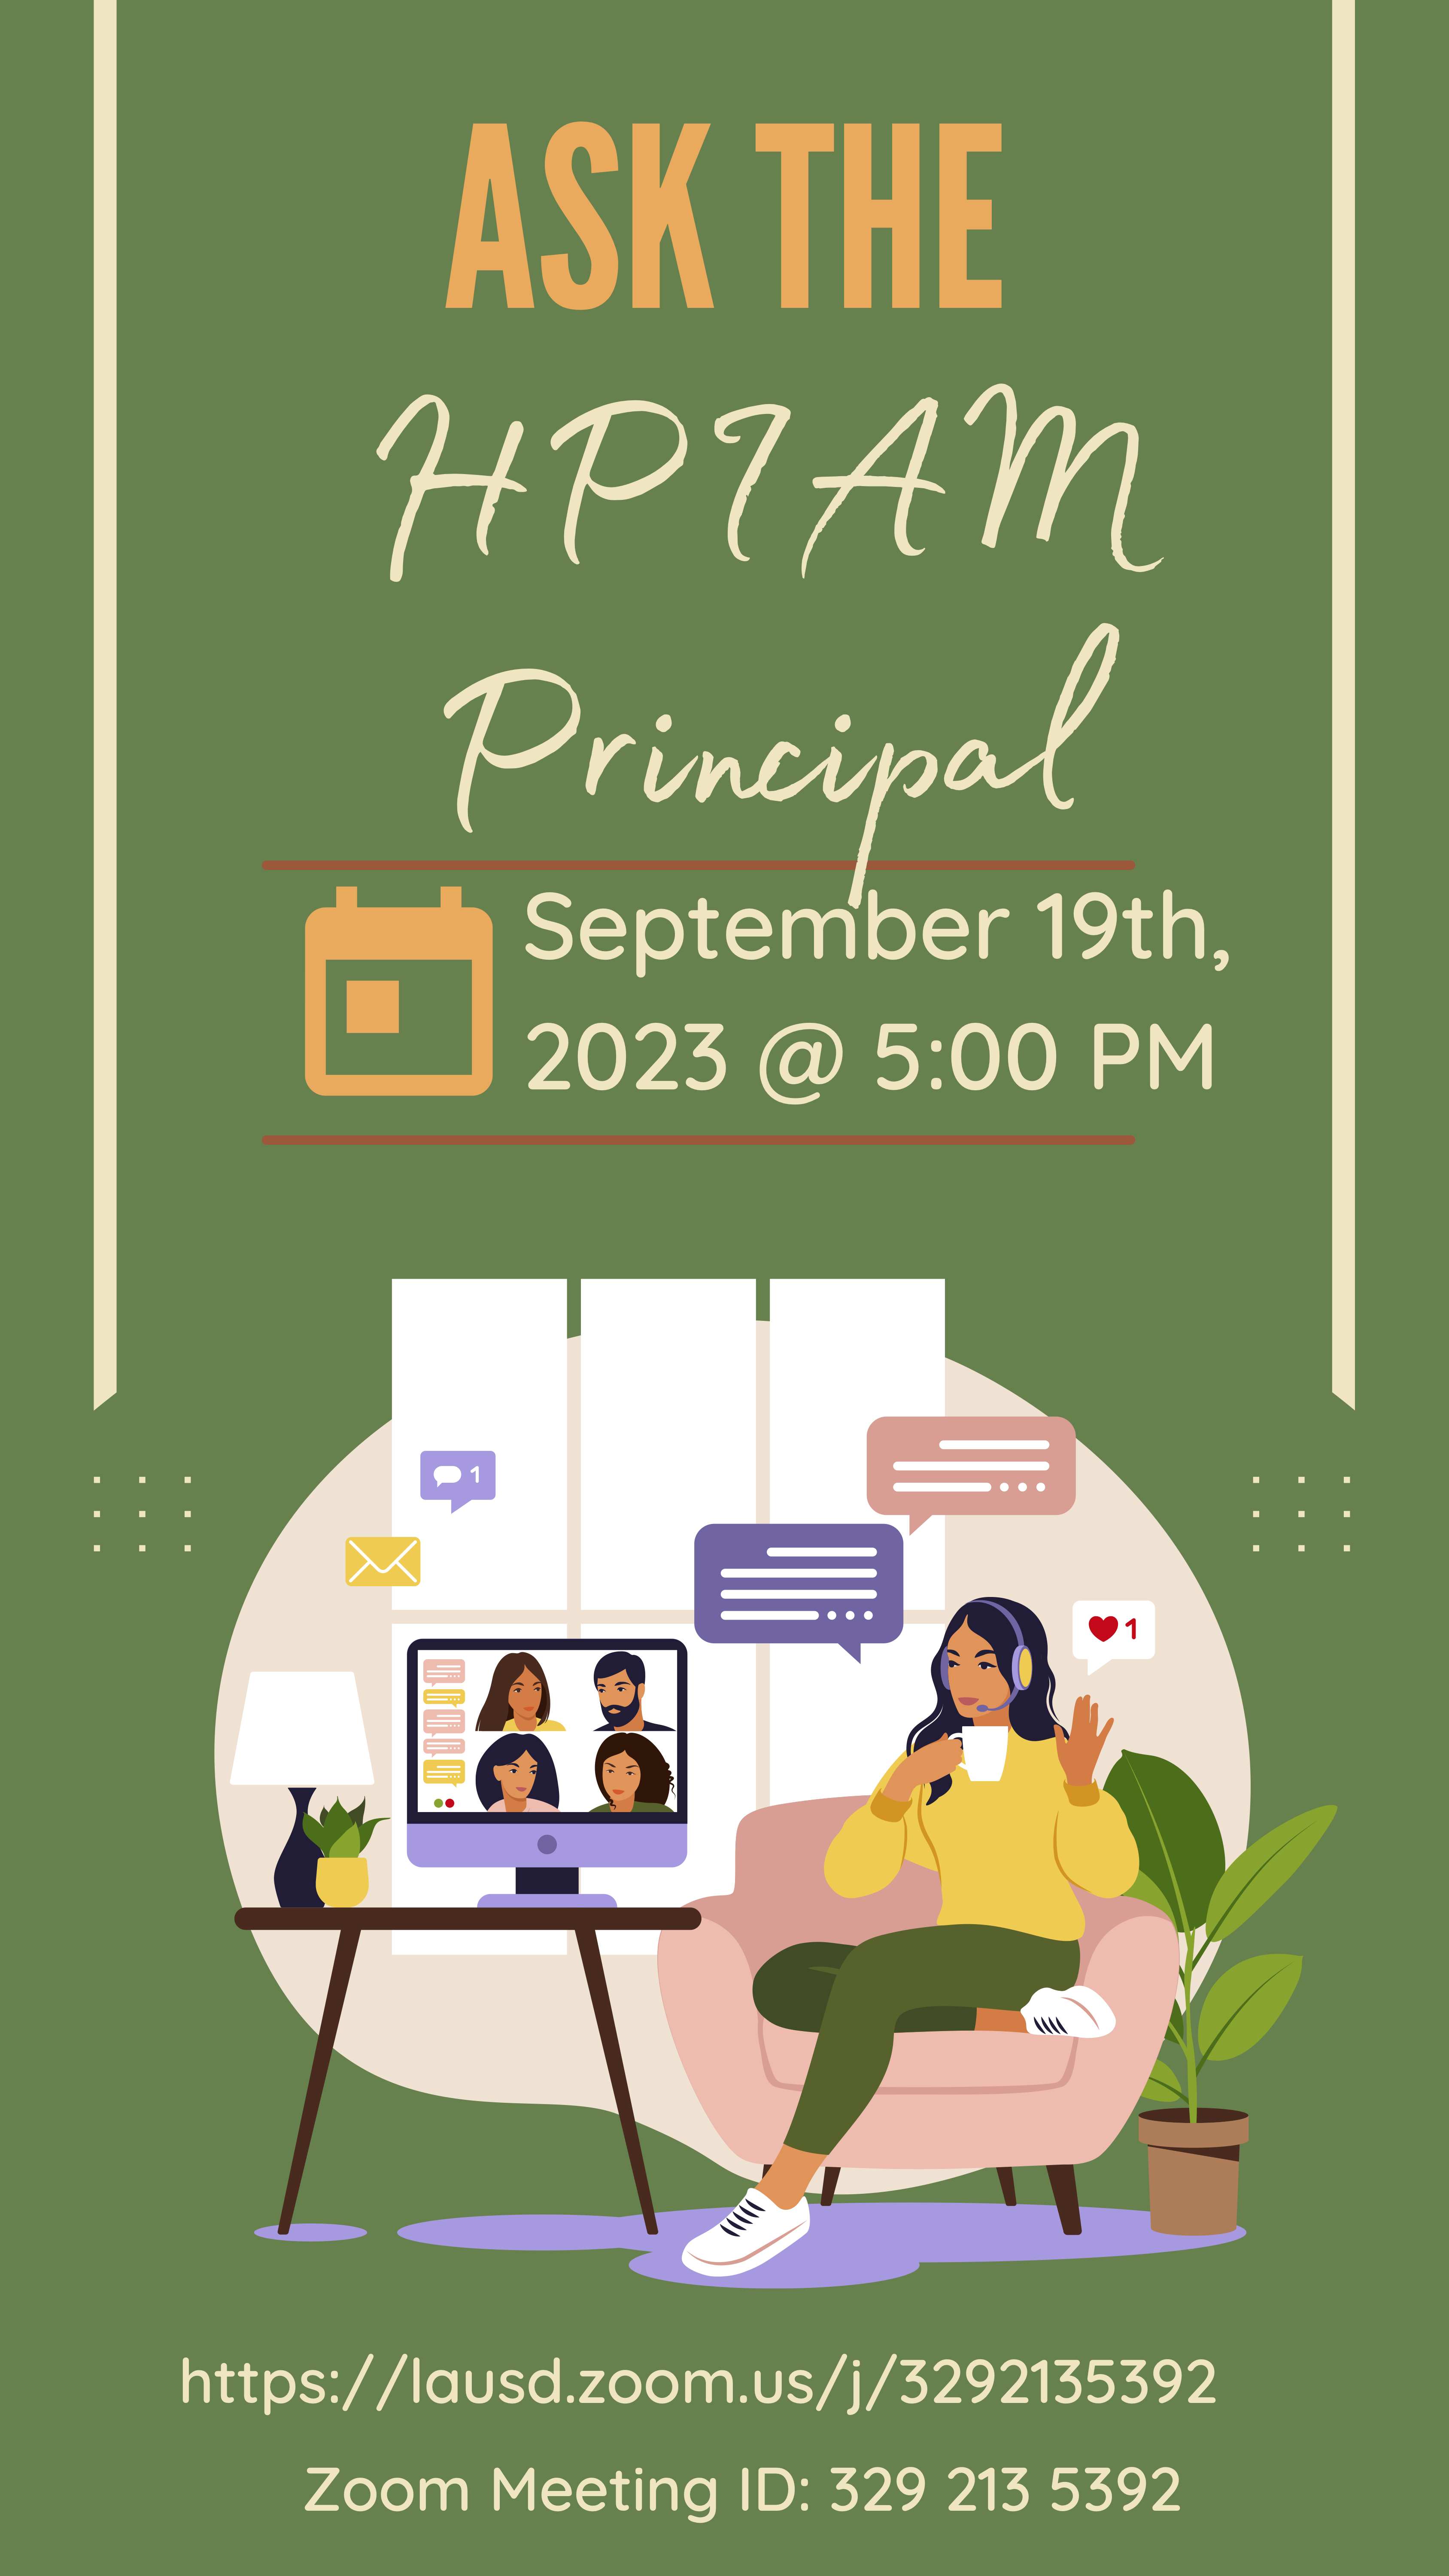 Ask the Principal Scheduled for 9-19-2023 at 5PM